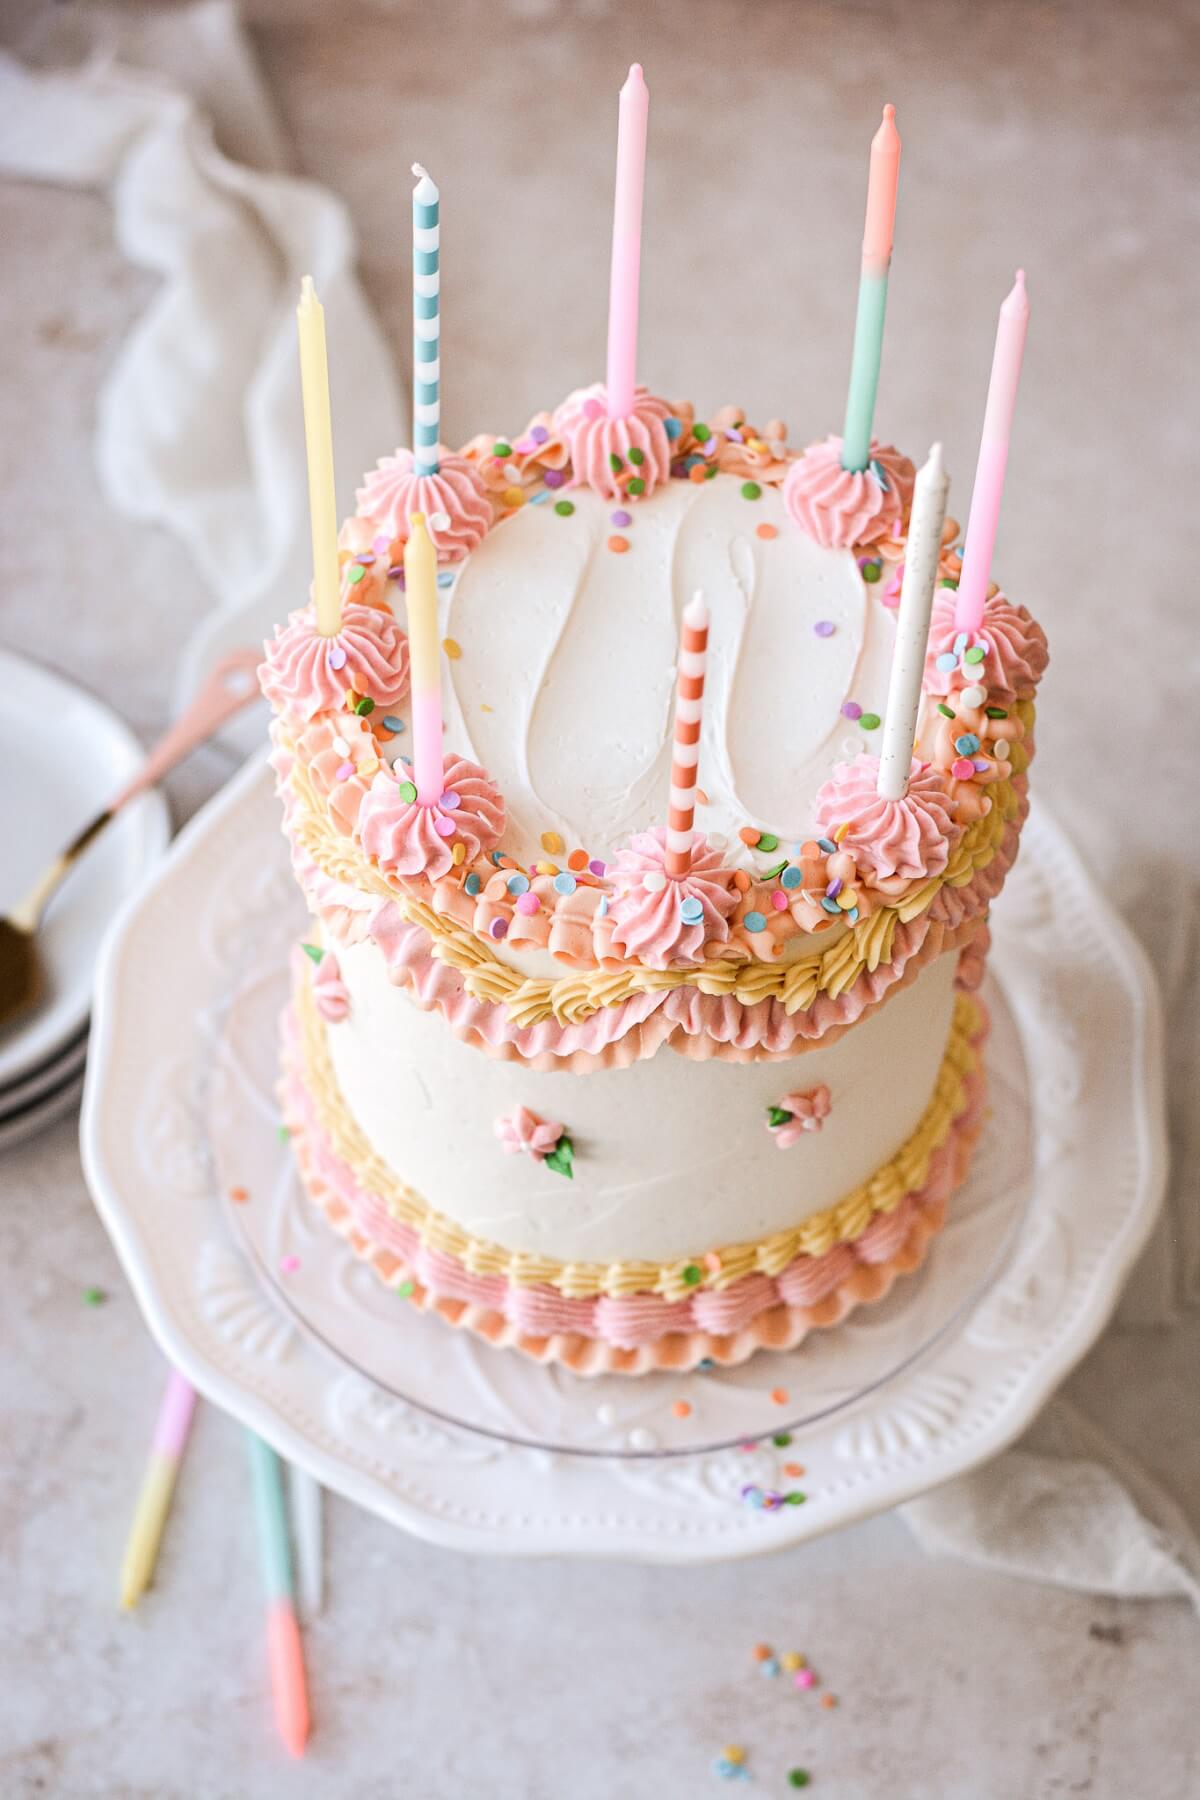 Birthday candles on a cake with vintage piping.